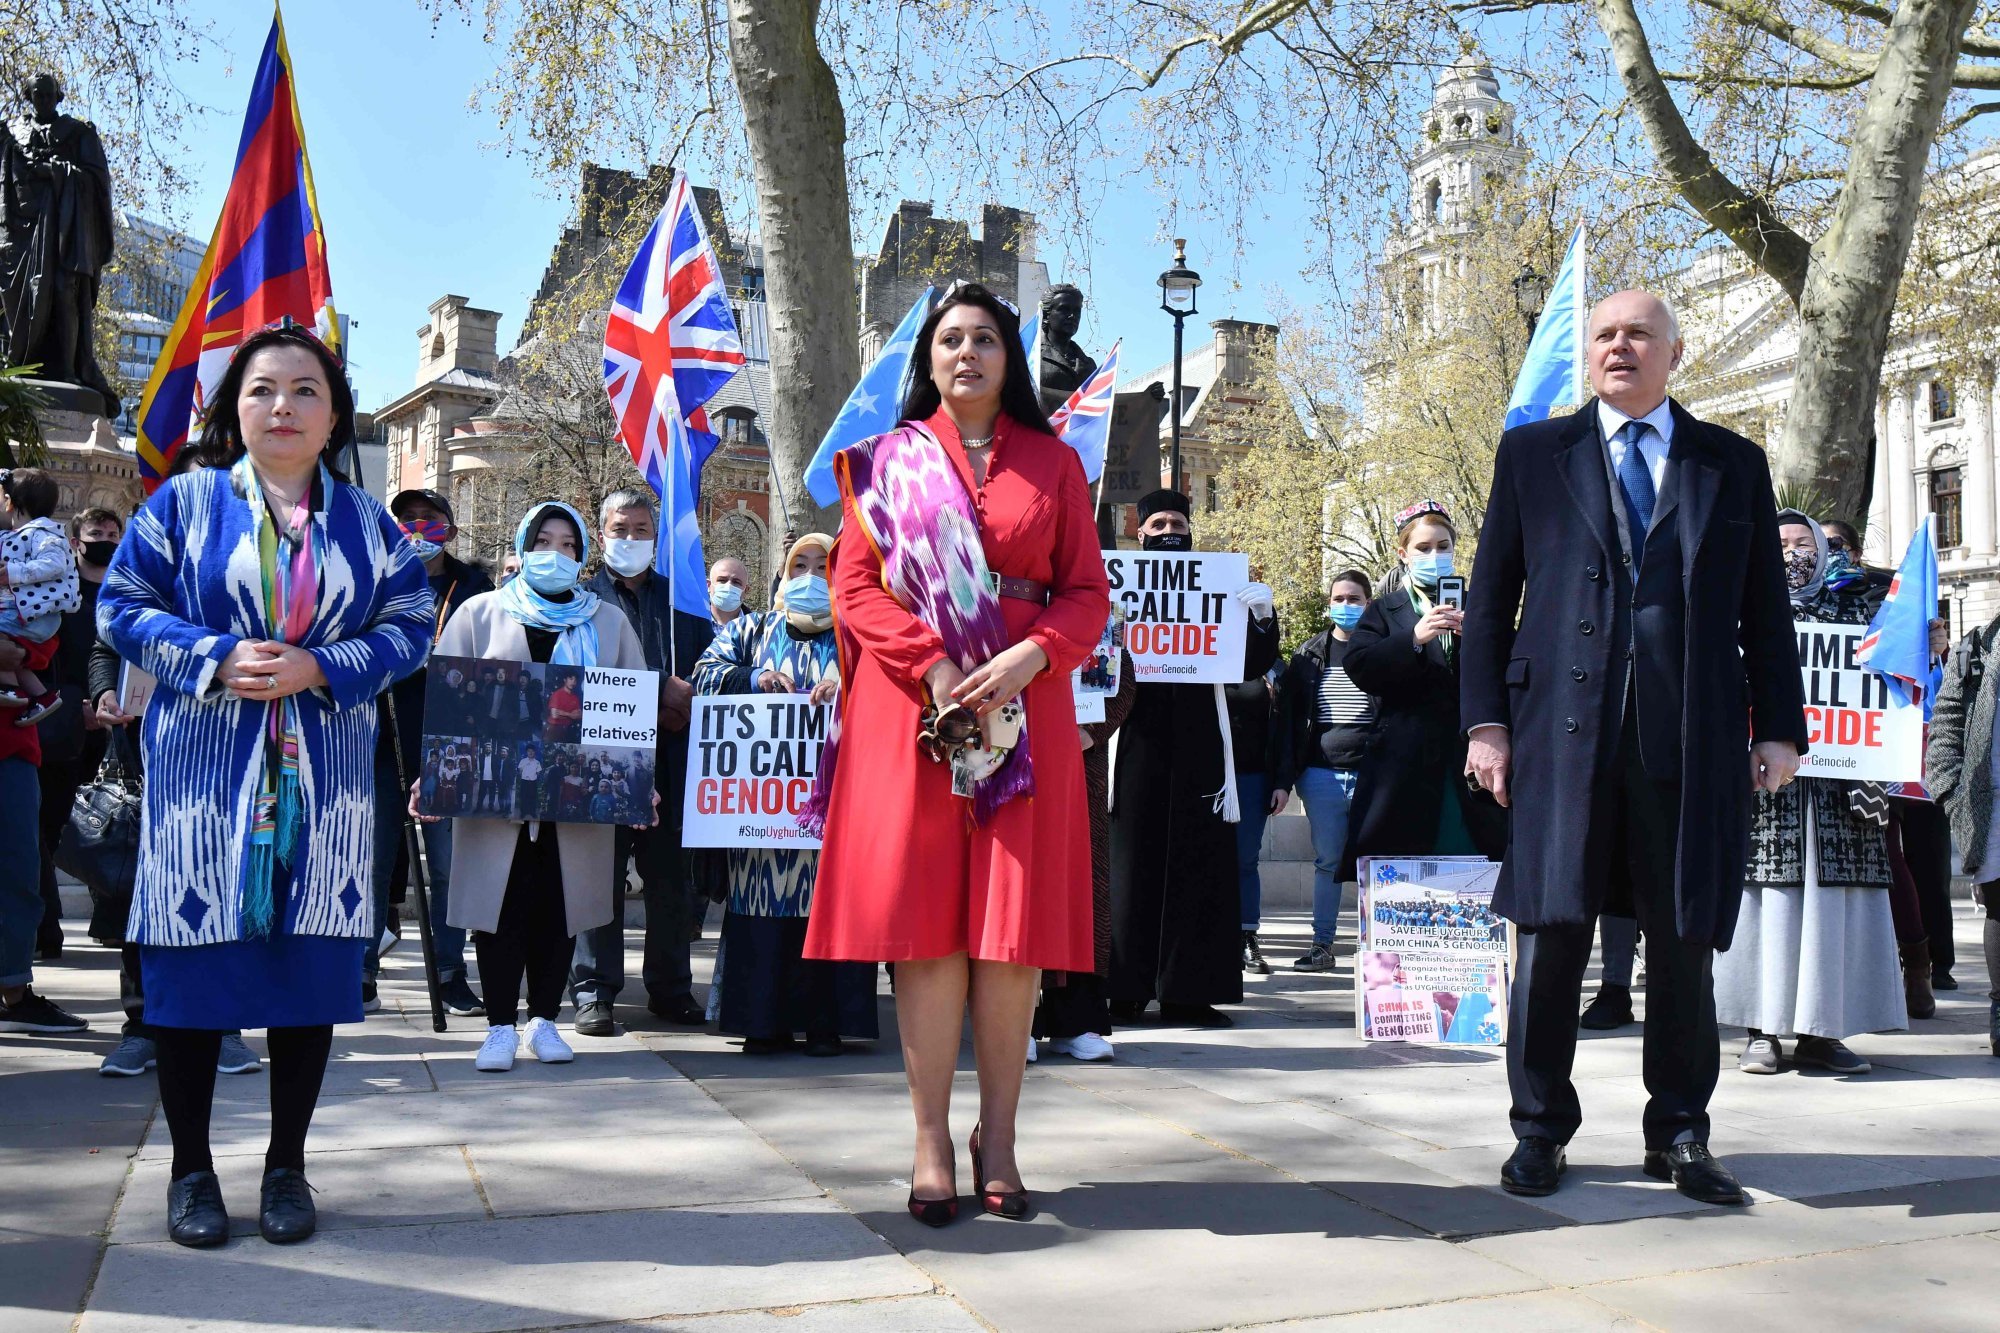 British Conservative Party lawmakers Nusrat Ghani (centre) and Iain Duncan Smith (right) during a demonstration in London last year urging support for China’s Uygur people. Photo: AFP